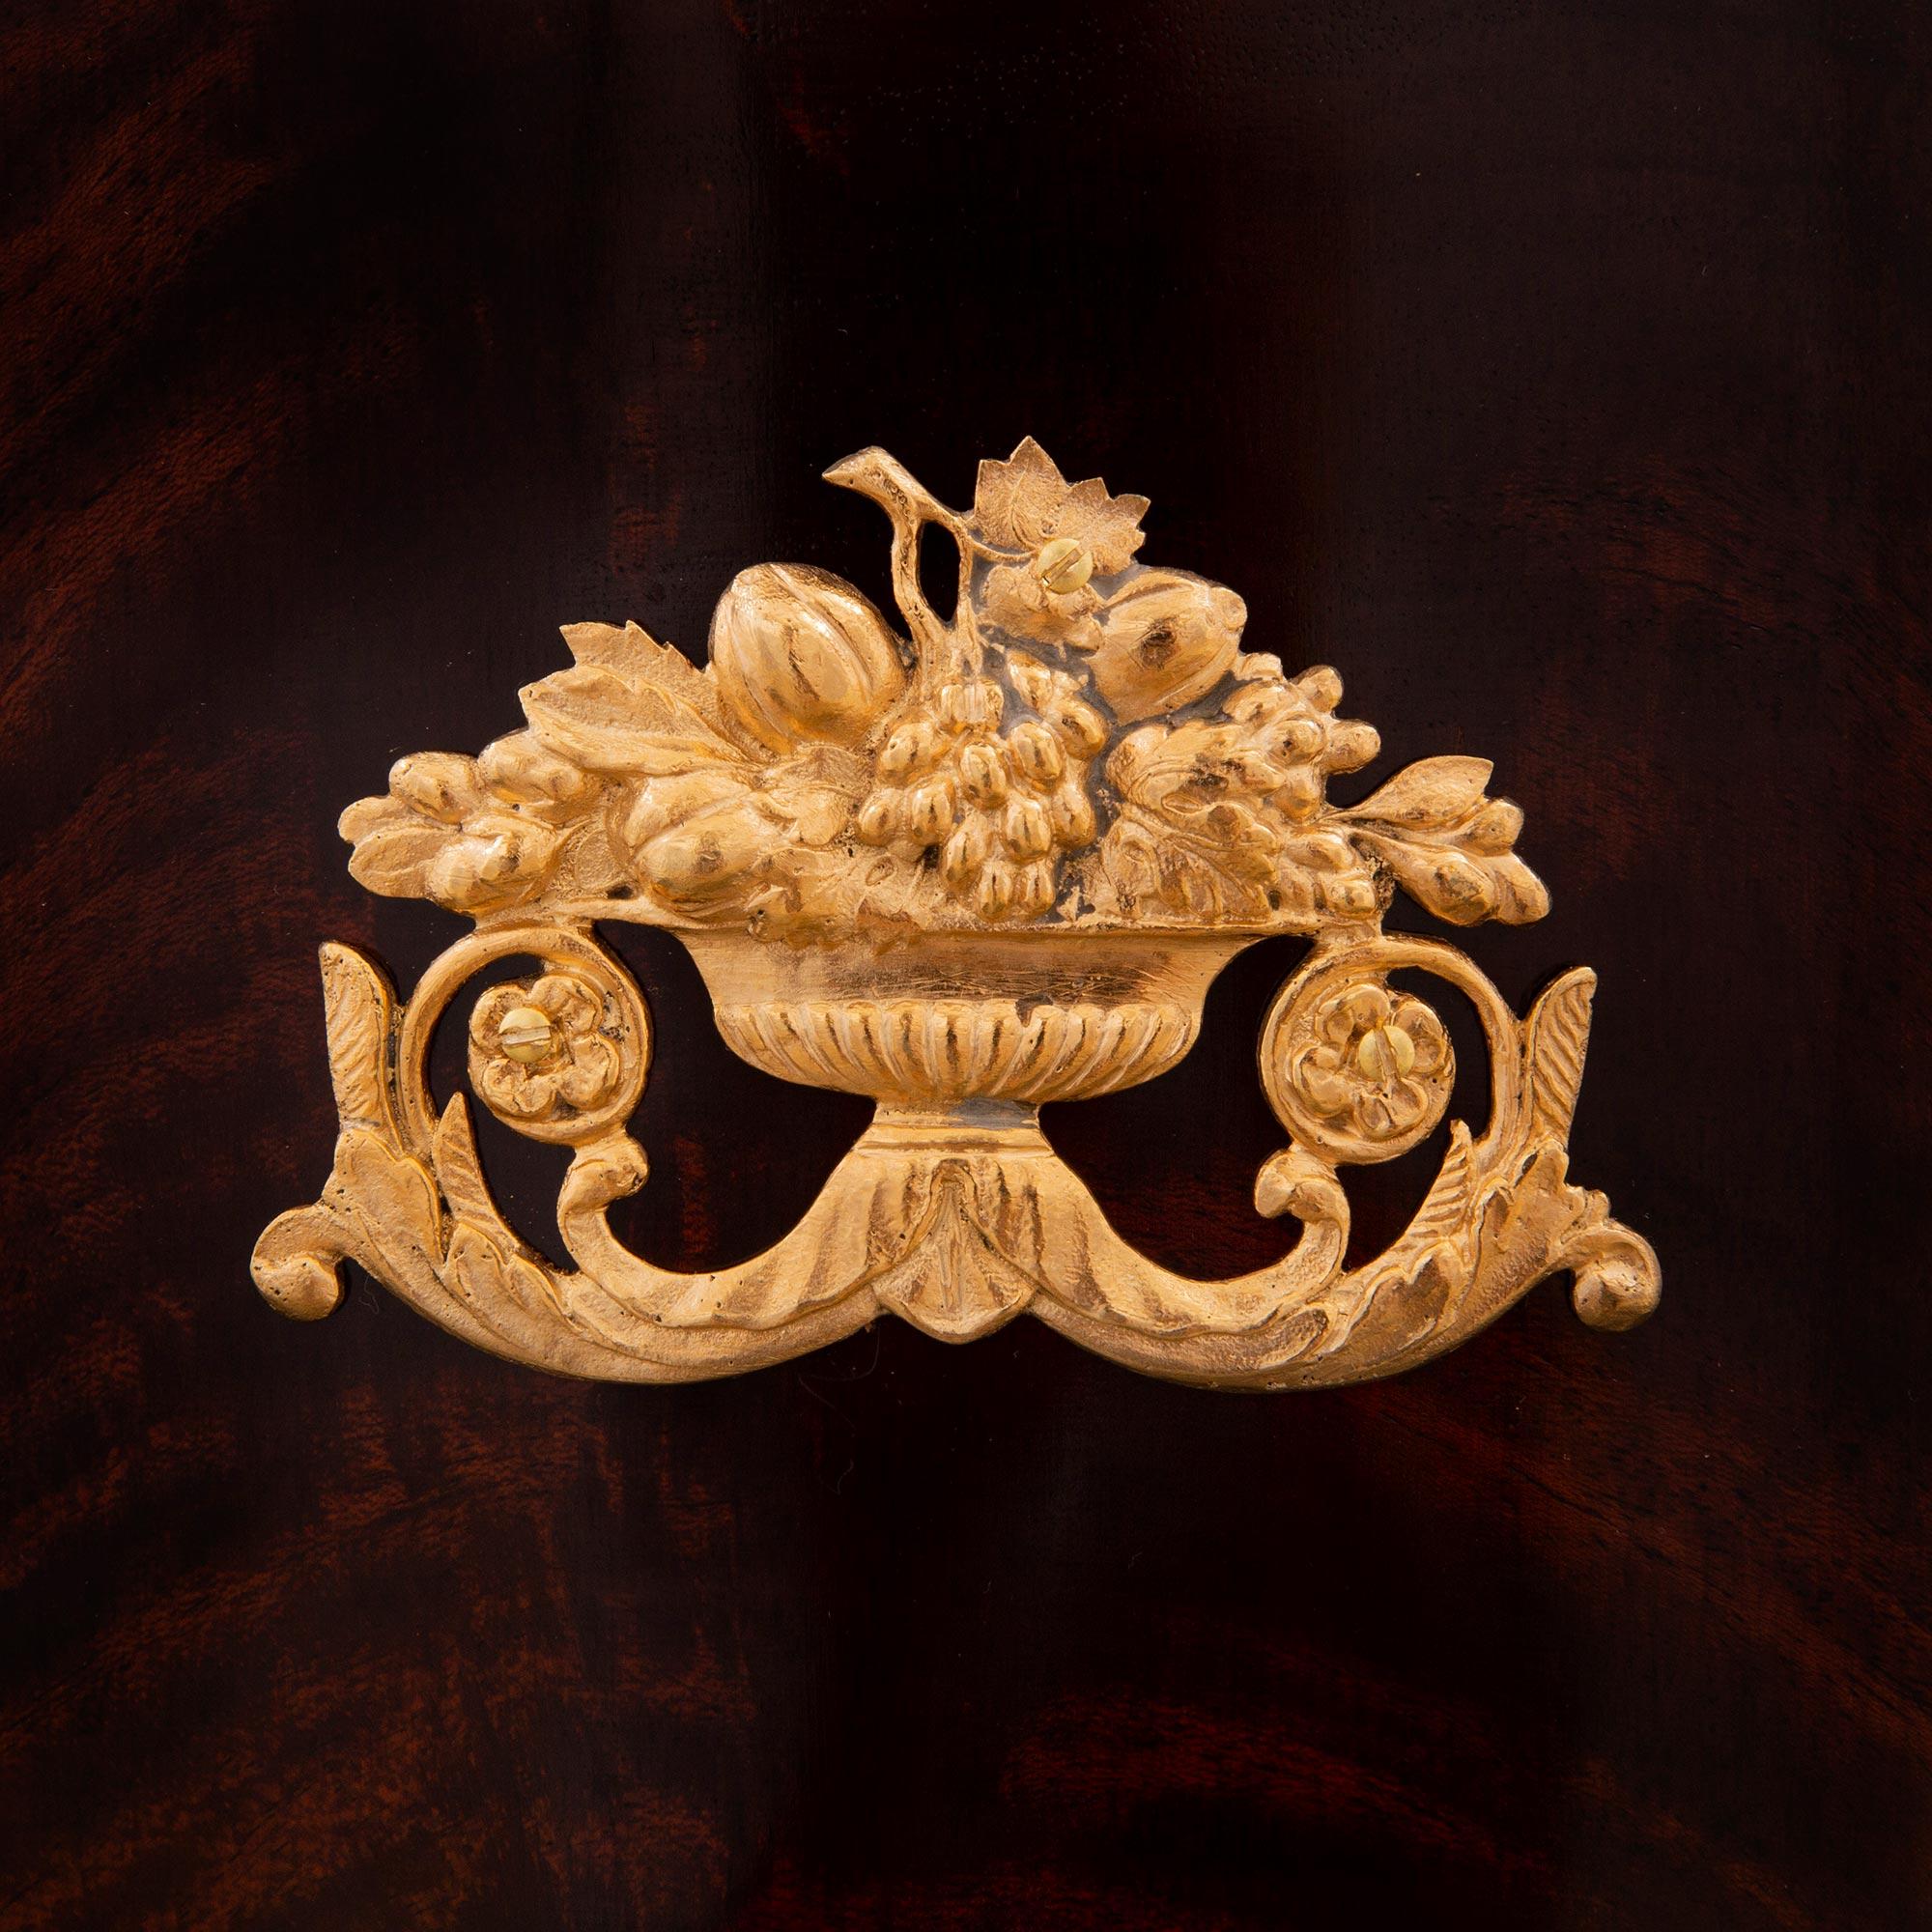 French 19th Century Neoclassical Style Mahogany and Ormolu Jardinière Planter For Sale 3